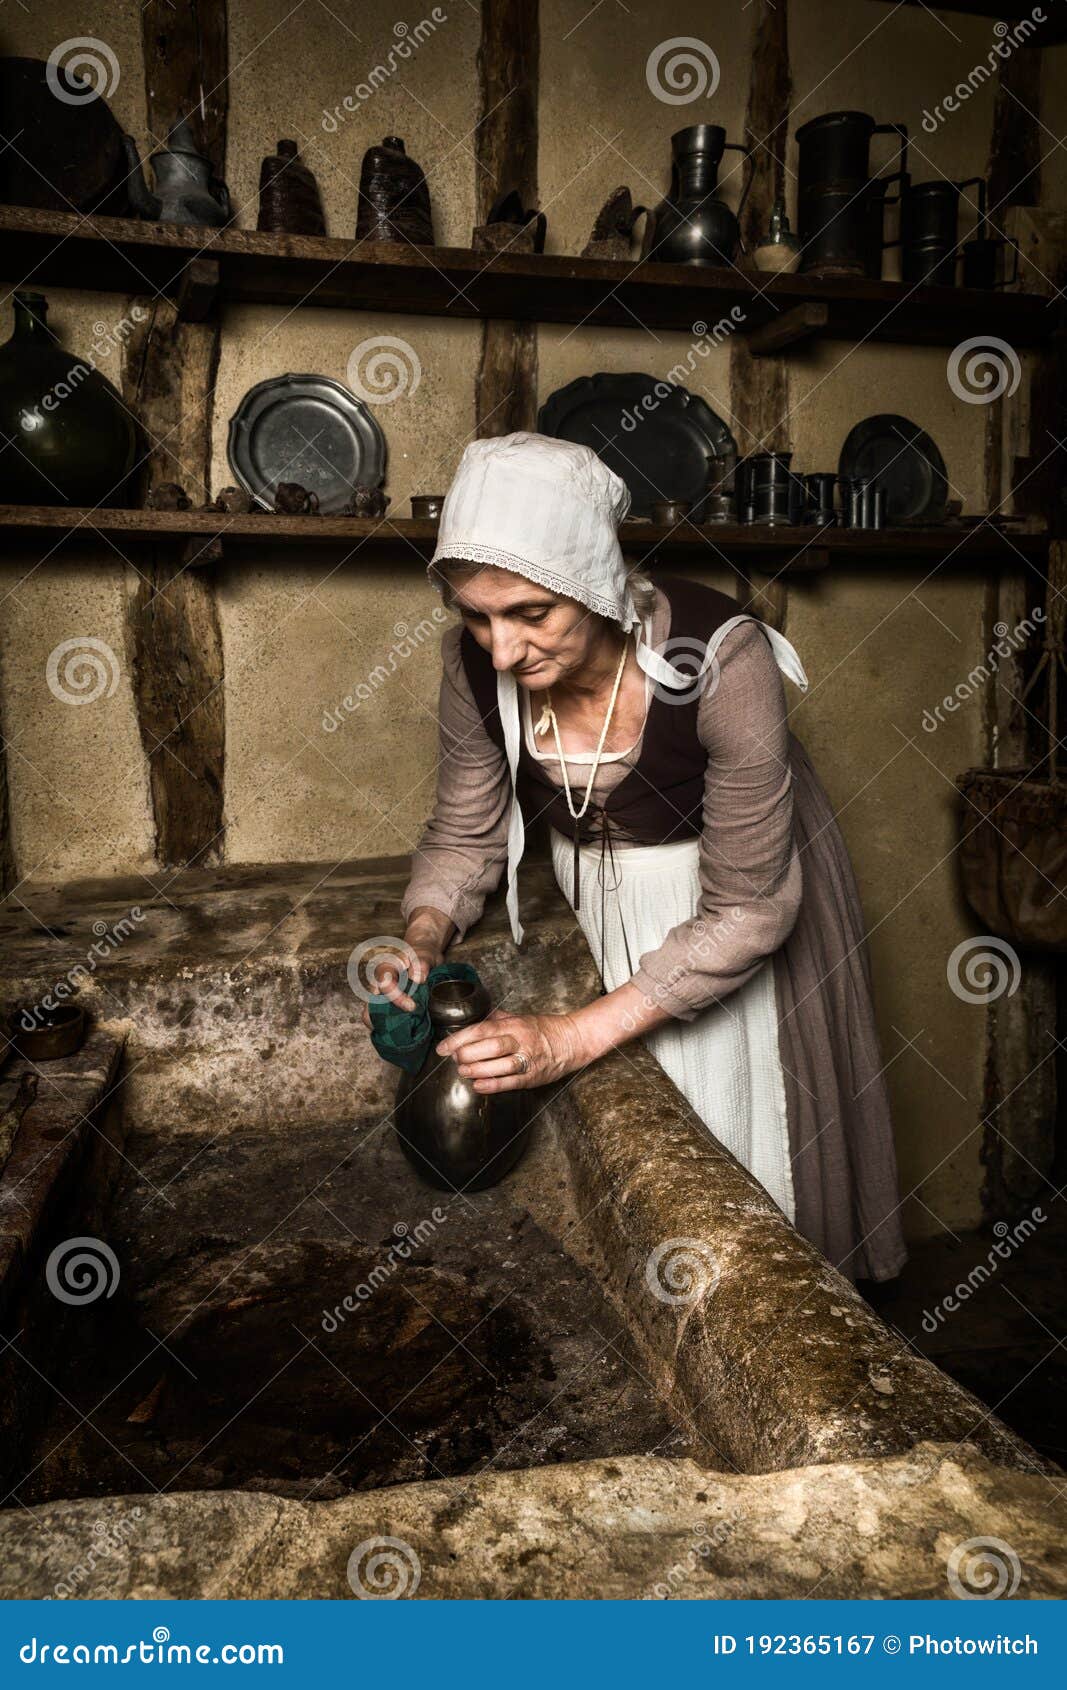 https://thumbs.dreamstime.com/z/medieval-portrait-maid-cleaning-kitchen-woman-dressed-as-peasant-working-authentic-french-castle-192365167.jpg